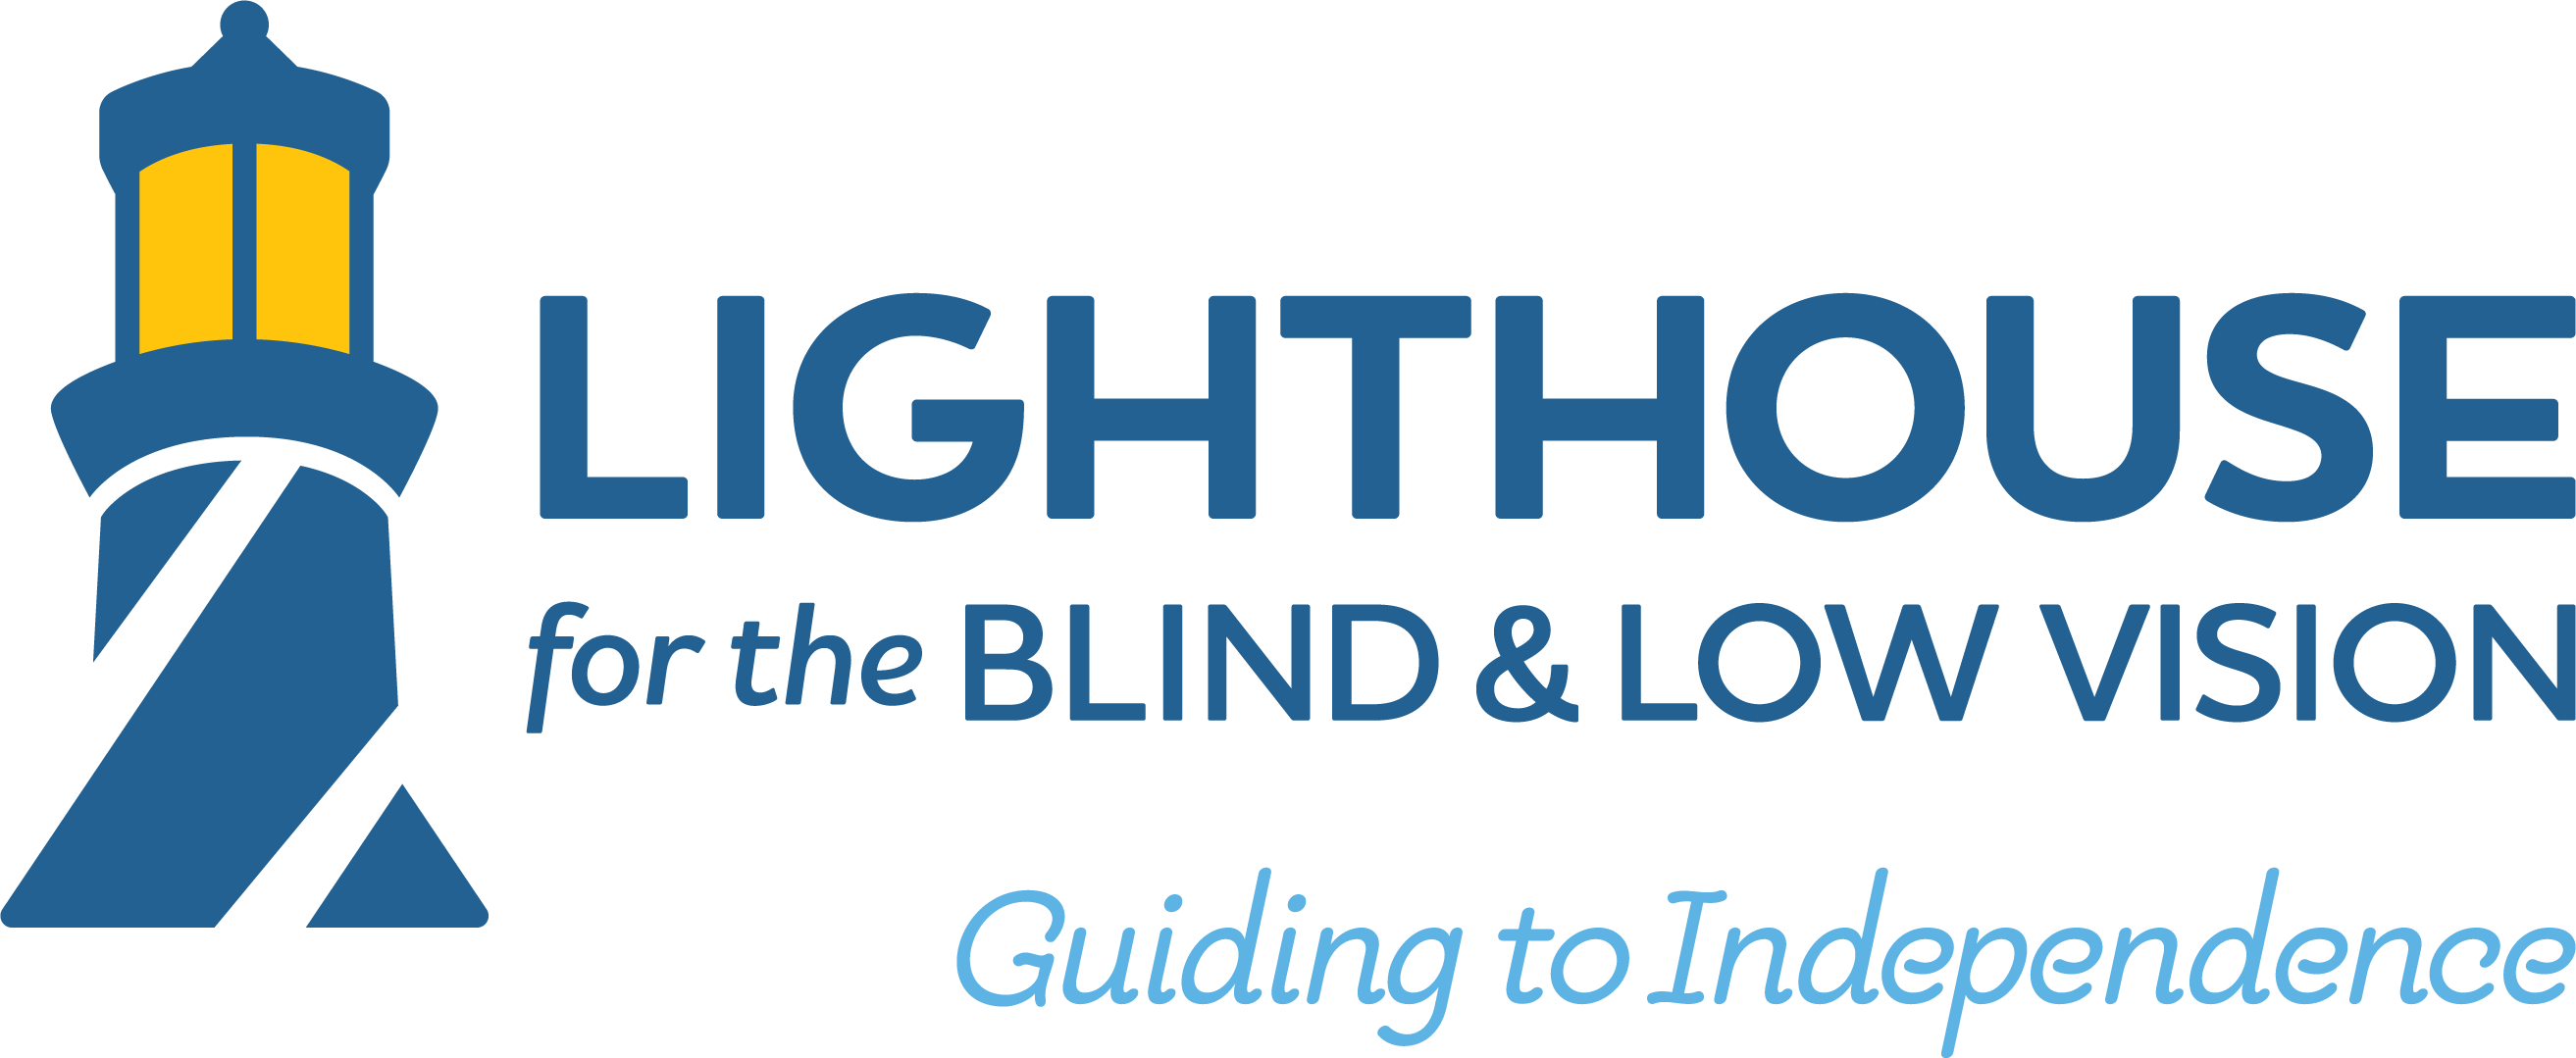 Lighthouse for the Blind and Low Vision - Tampa